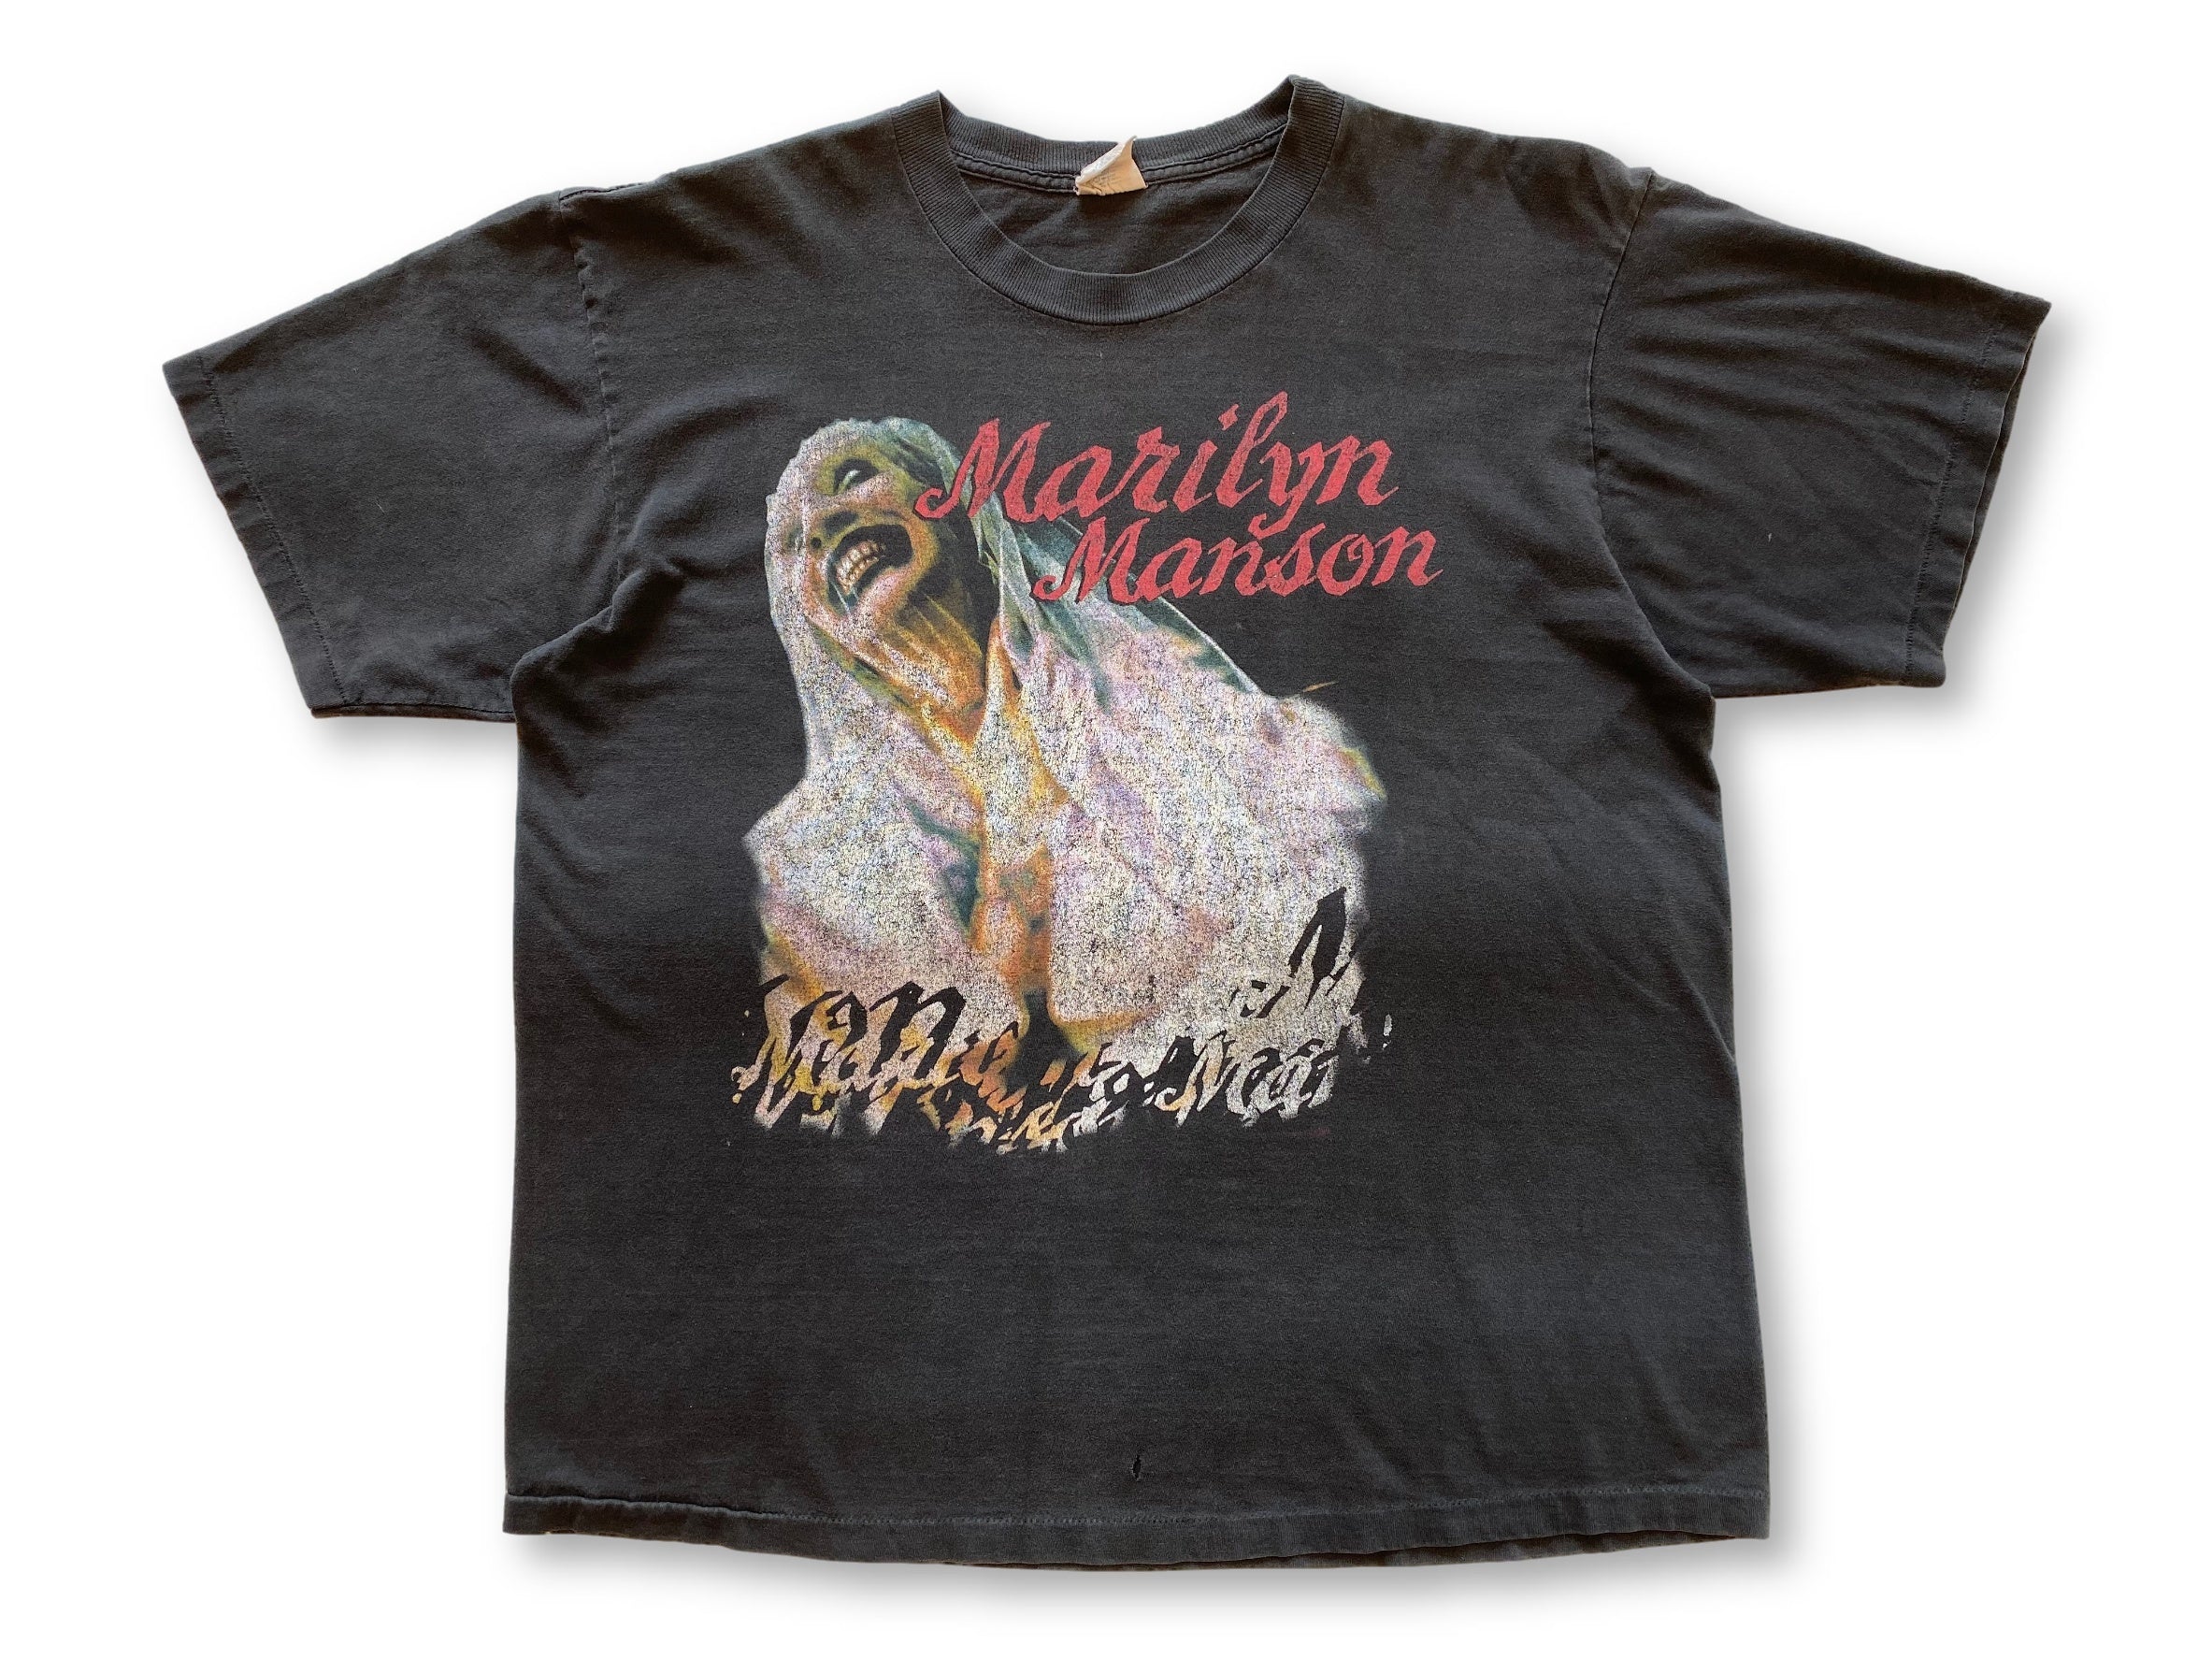 Vintage Marilyn Manson Sweet Dreams Are Made of This T-Shirt - XL